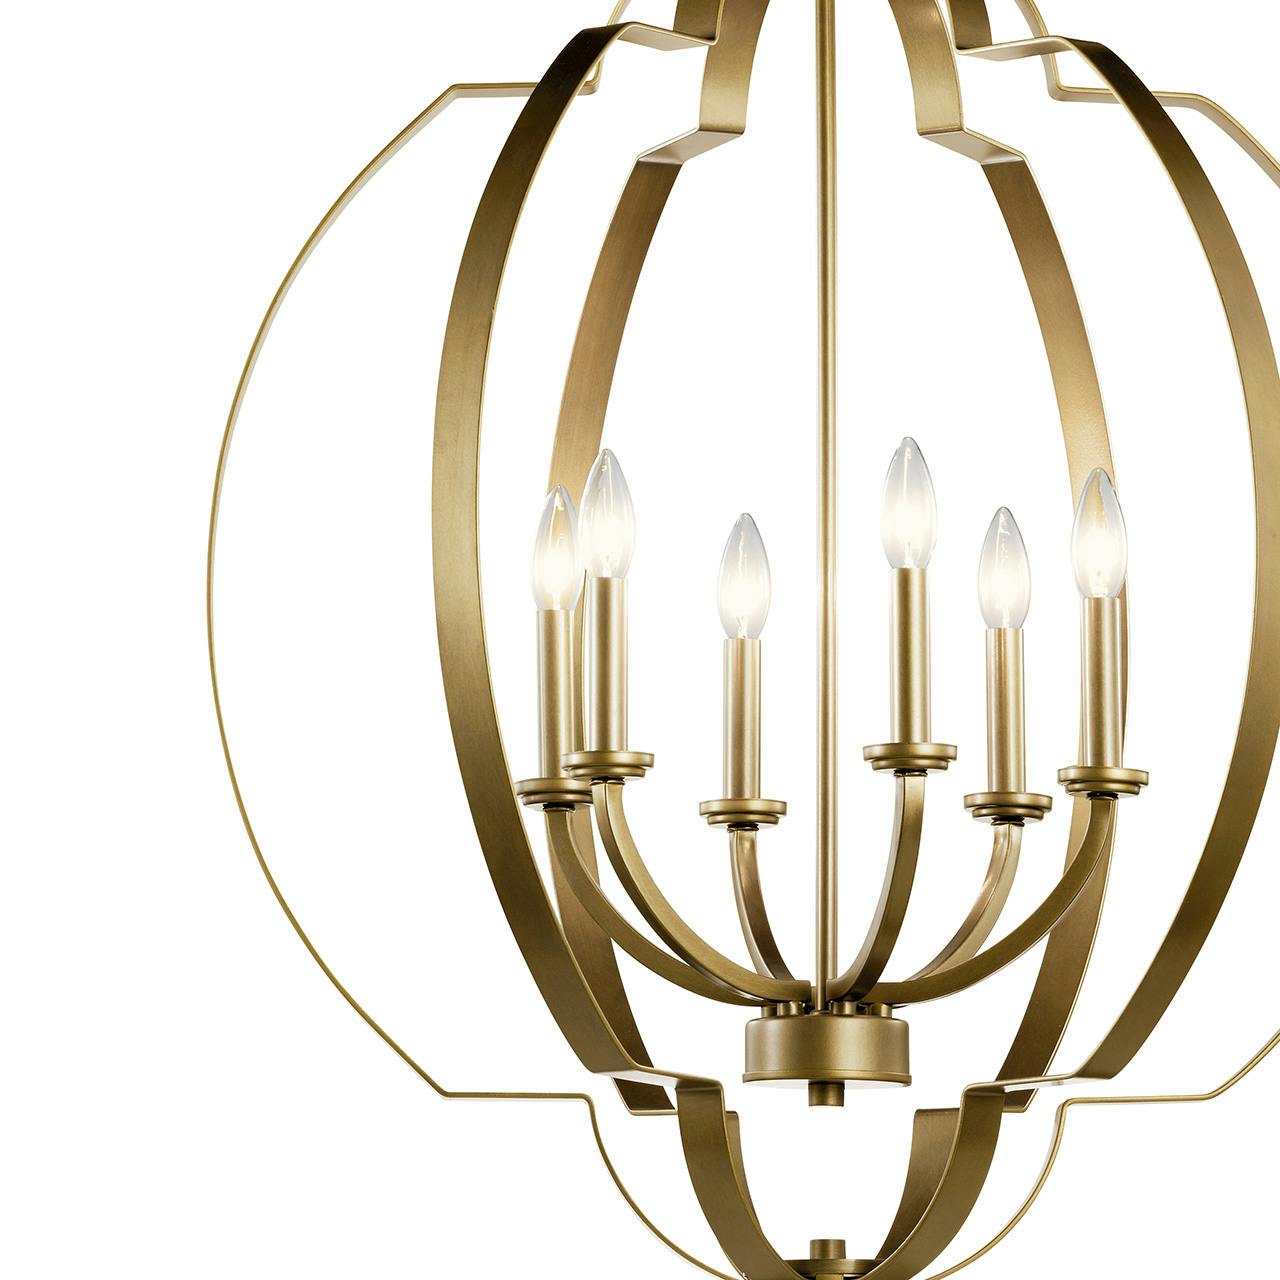 Close up view of the Voleta 6 Light Foyer Chandelier Brass on a white background